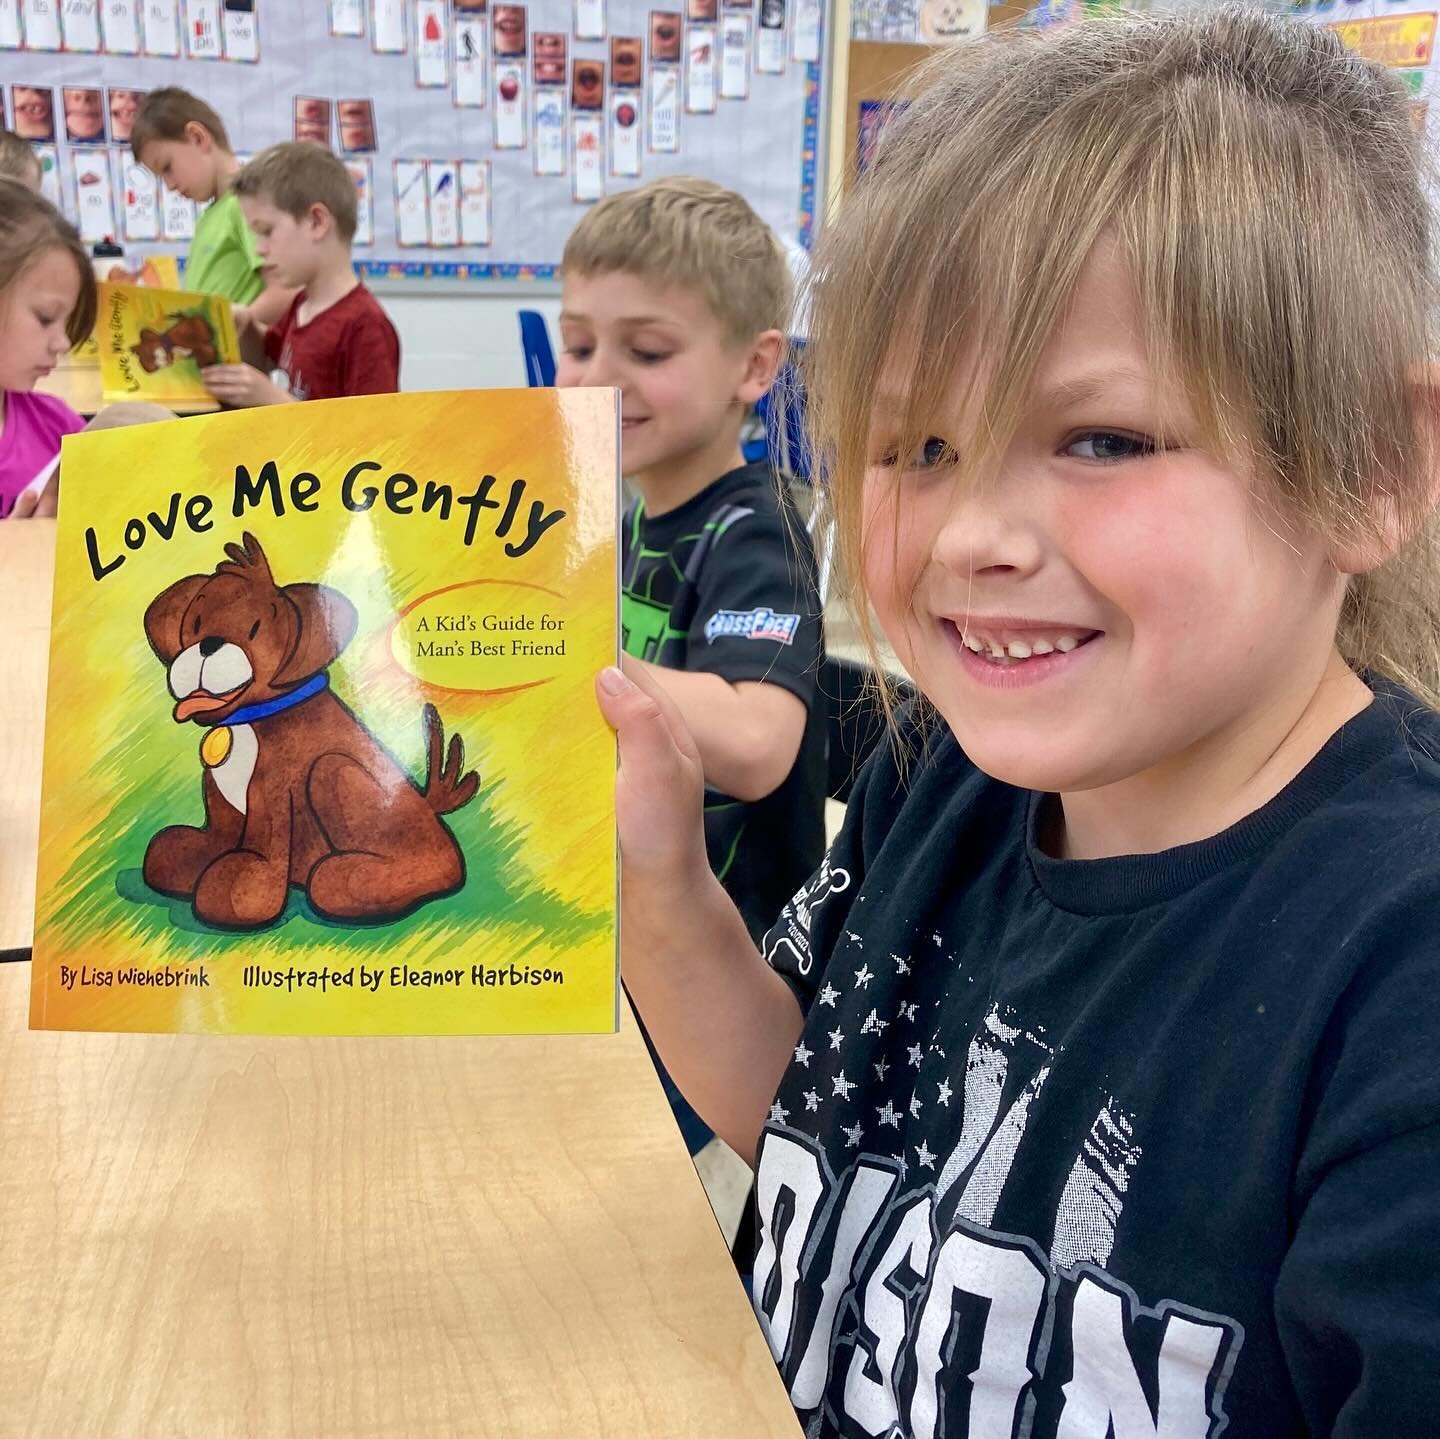 We are happy to see so many smiling faces as these kids learning how to kindly care for pets. Every student was gifted one of our Love Me Gently books and an Activity Book to take home. Thanks to @jeffersoncountyhumanesociety for making a wonderful d